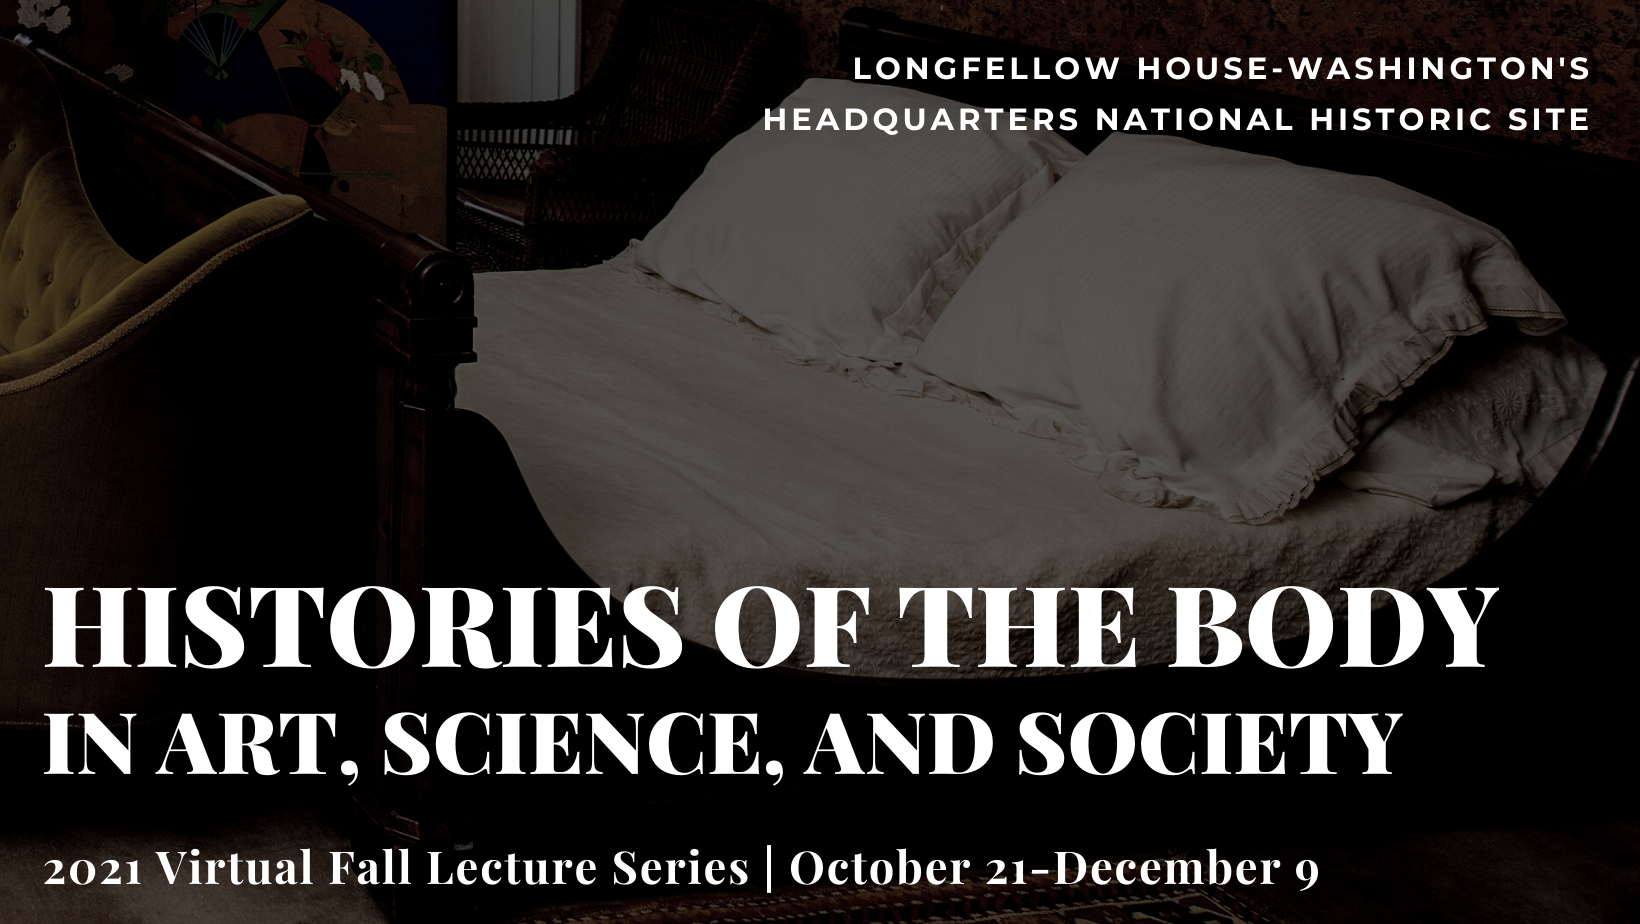 Photograph of 19th century bed with text "Longfellow House-Washington's Headquarters National Historic Site / Histories of the body in Art, science, and society / 2021 Virtual Fall Lecture Series